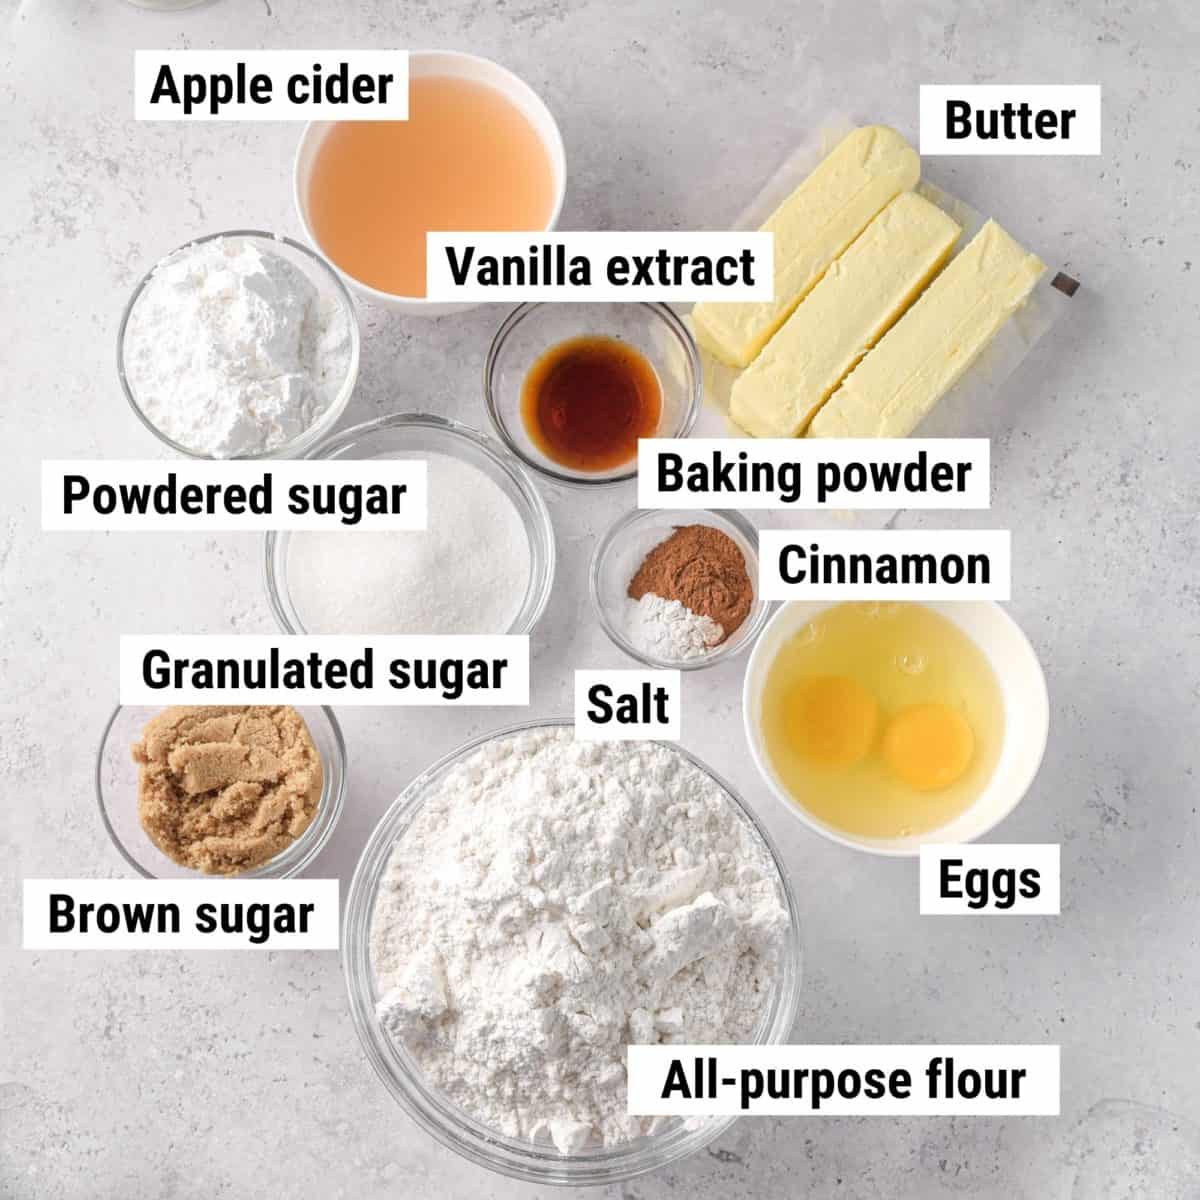 The recipe ingredients used to make apple cider cupcakes spread out on a table.